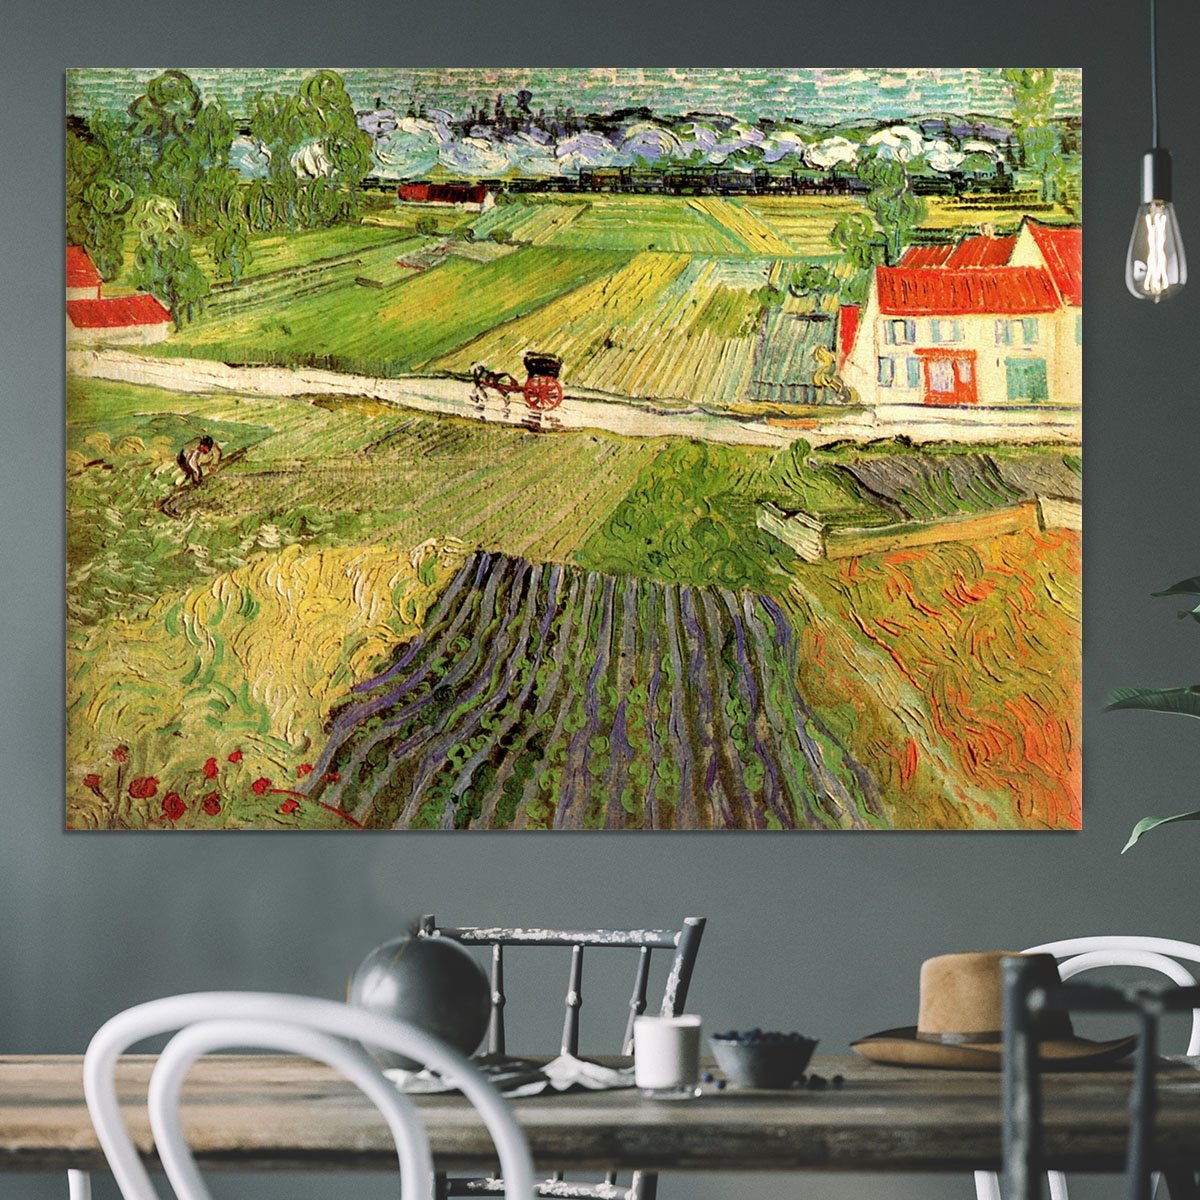 Landscape with Carriage and Train in the Background by Van Gogh Canvas Print or Poster